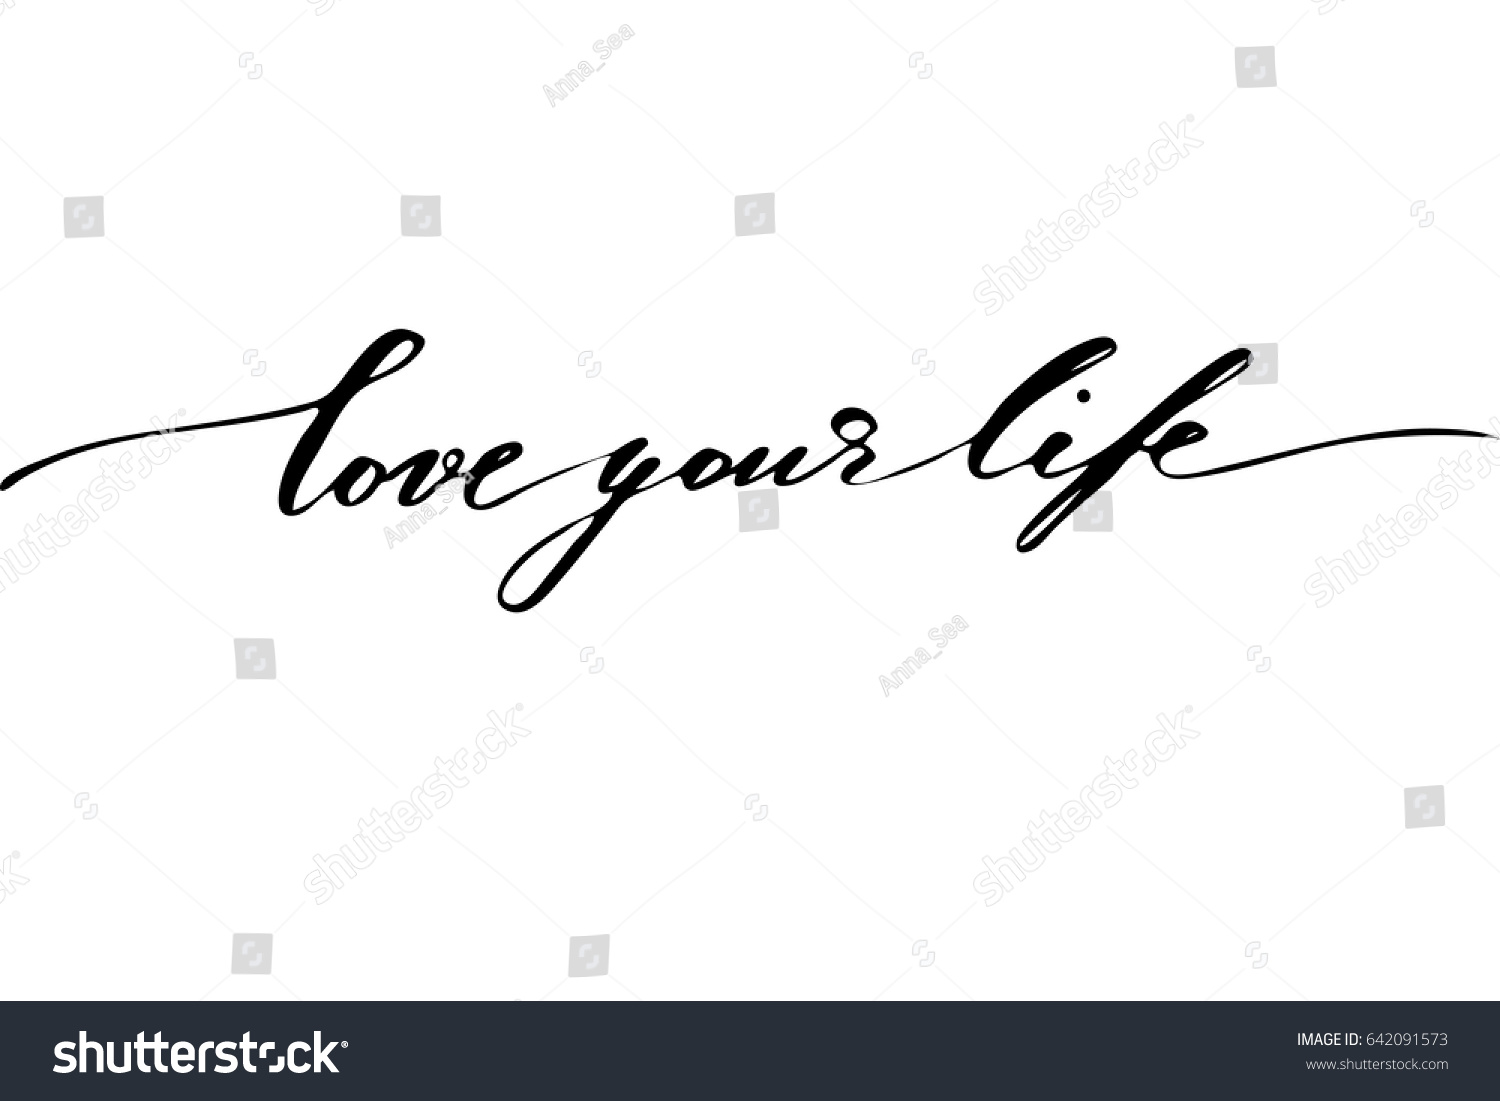 Love your life lettering phrase quote text handwritten black text isolated on white background vector